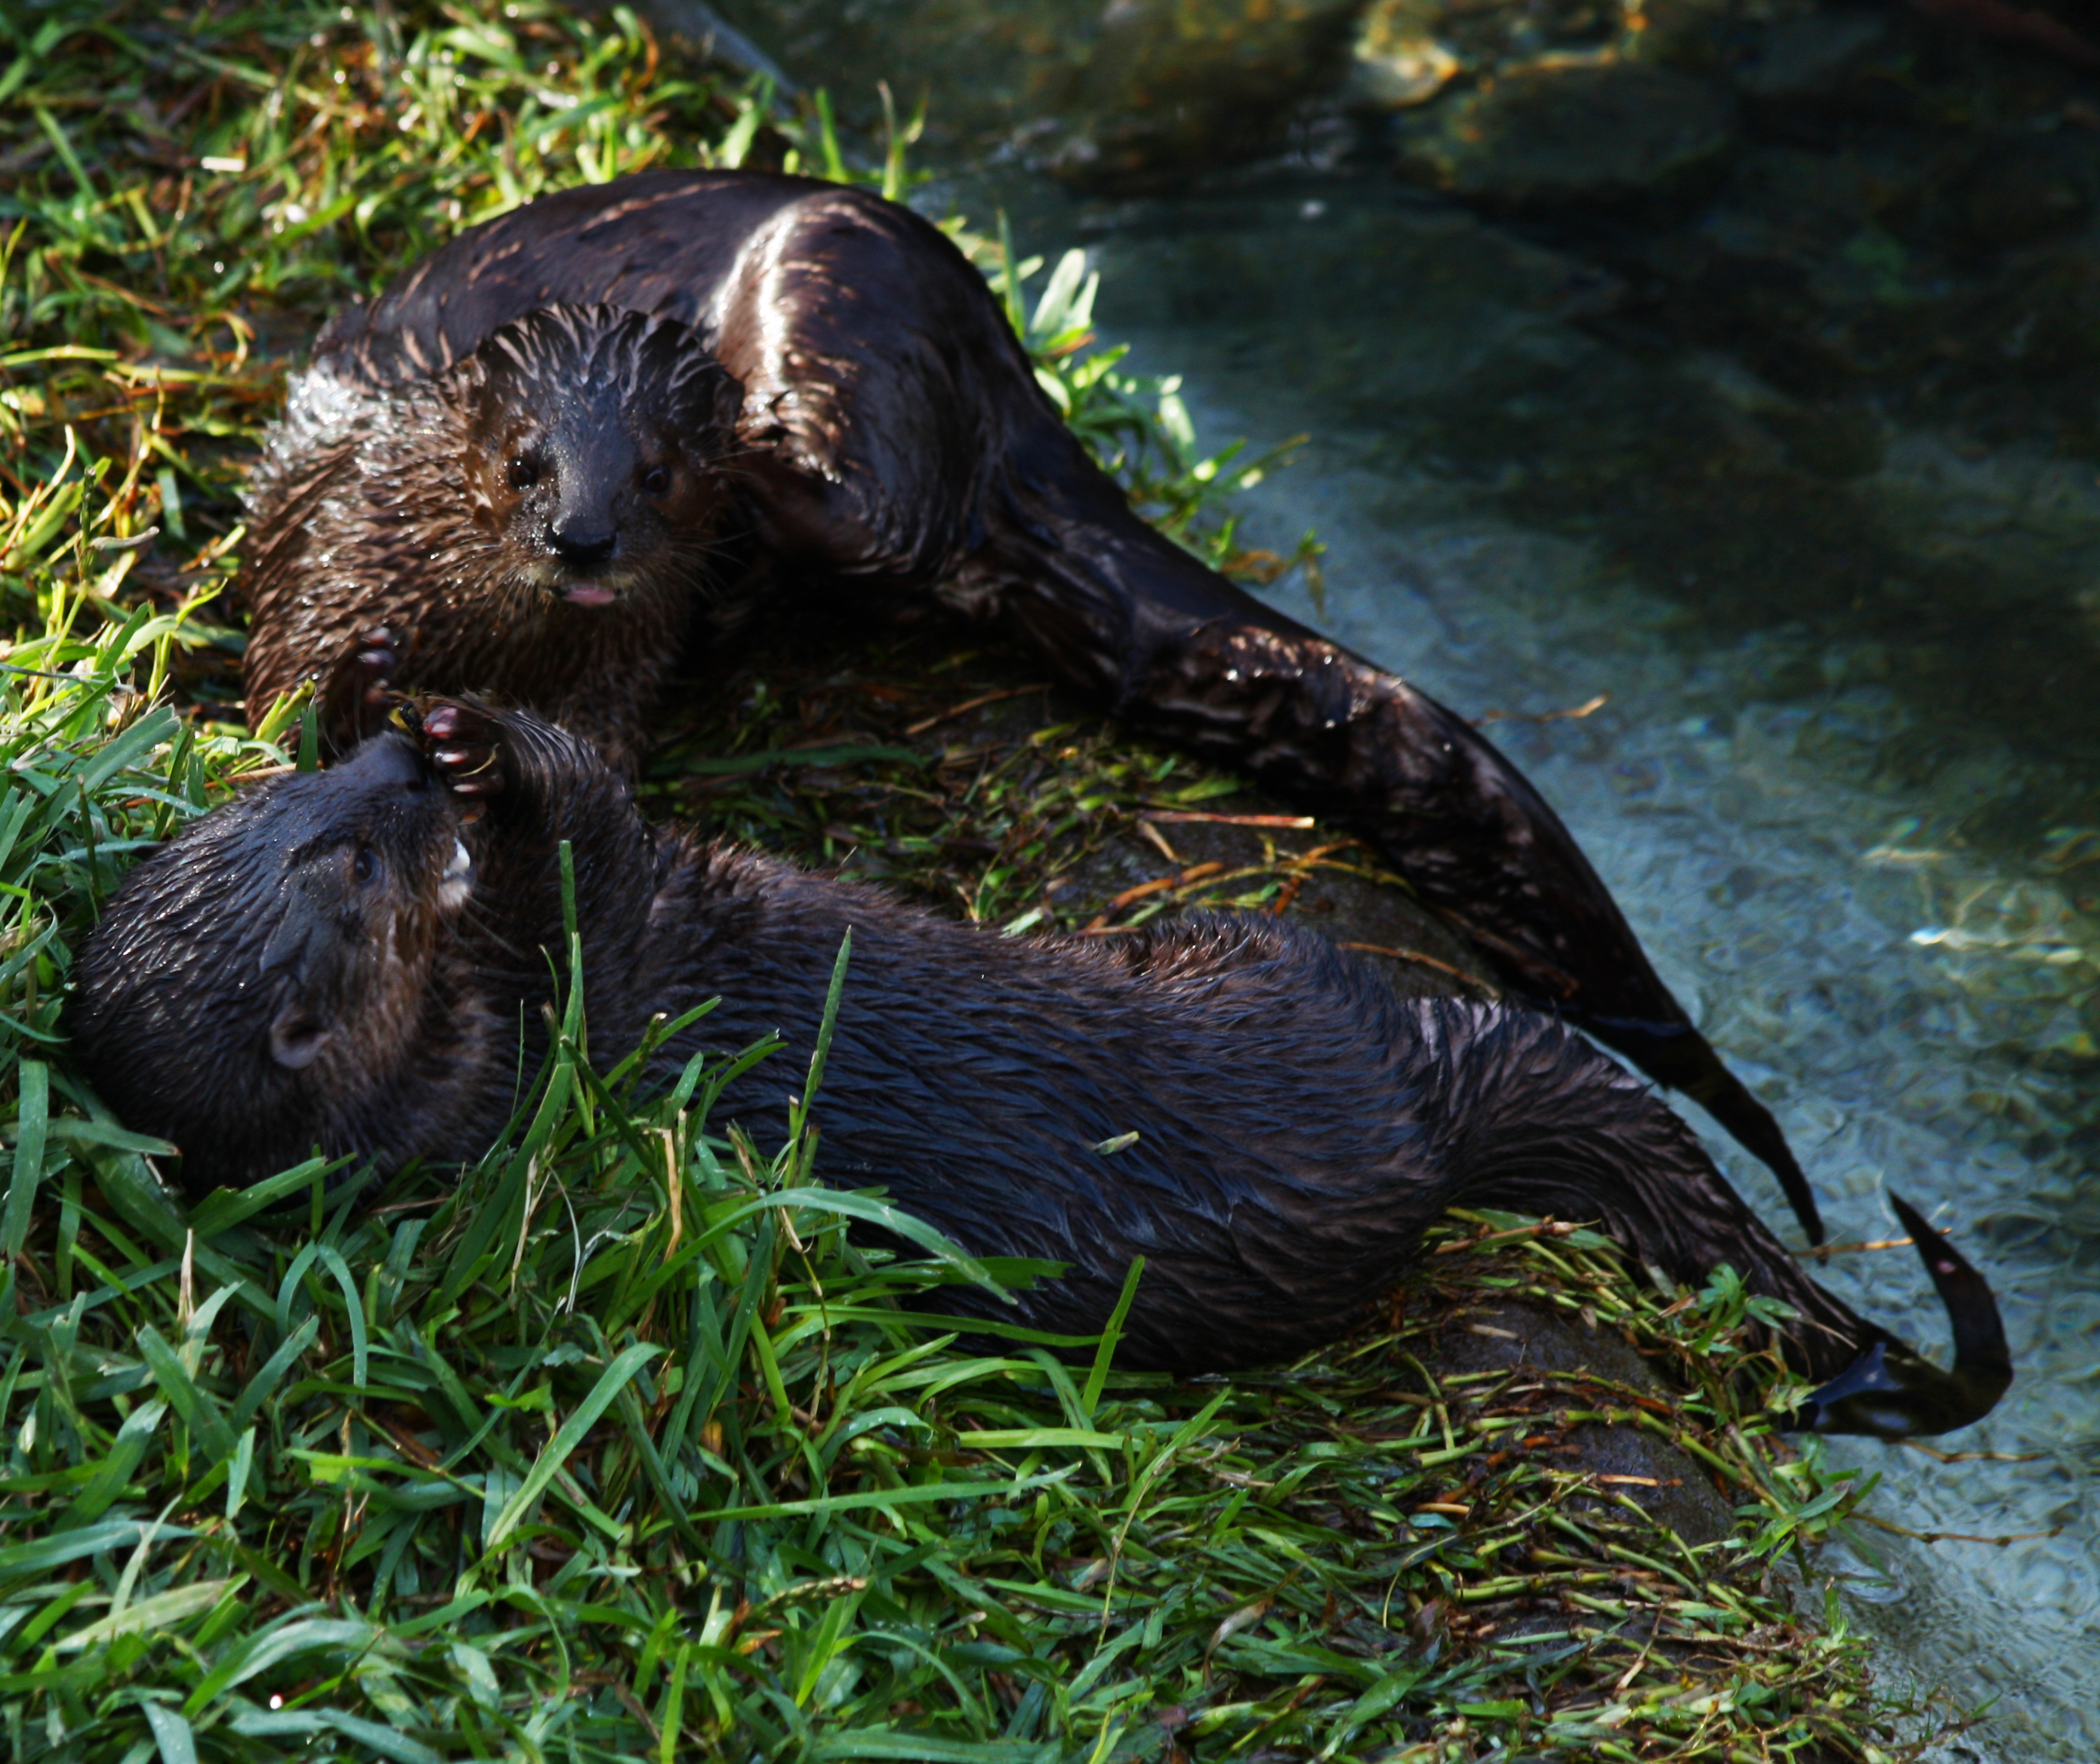 Spotted-necked otter media - Encyclopedia of Life